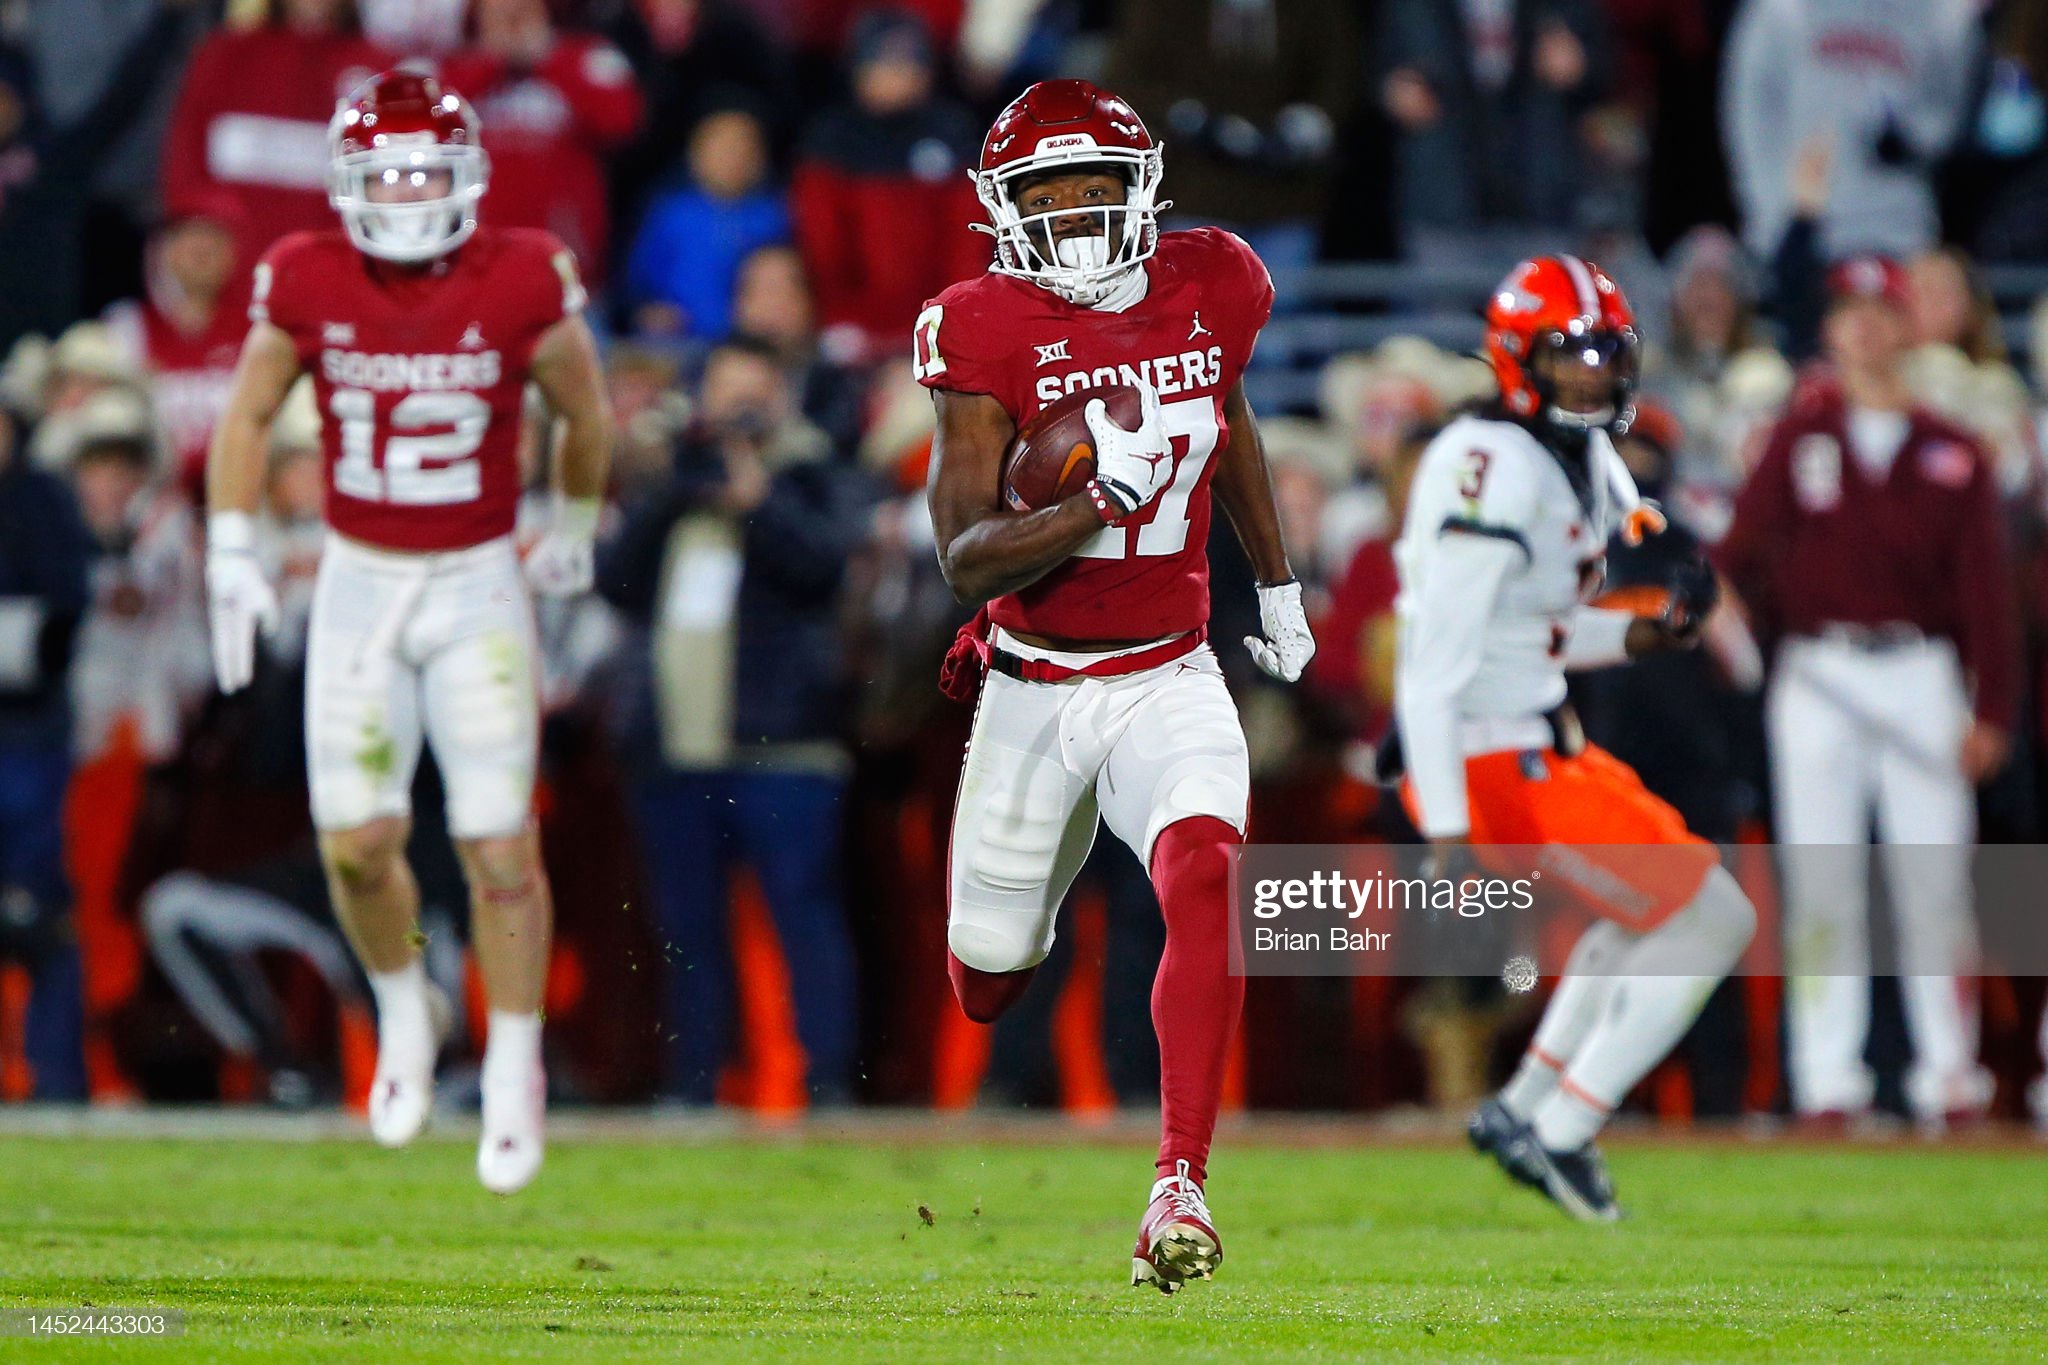 2023 NFL Draft Scouting Report: WR Marvin Mims, Oklahoma